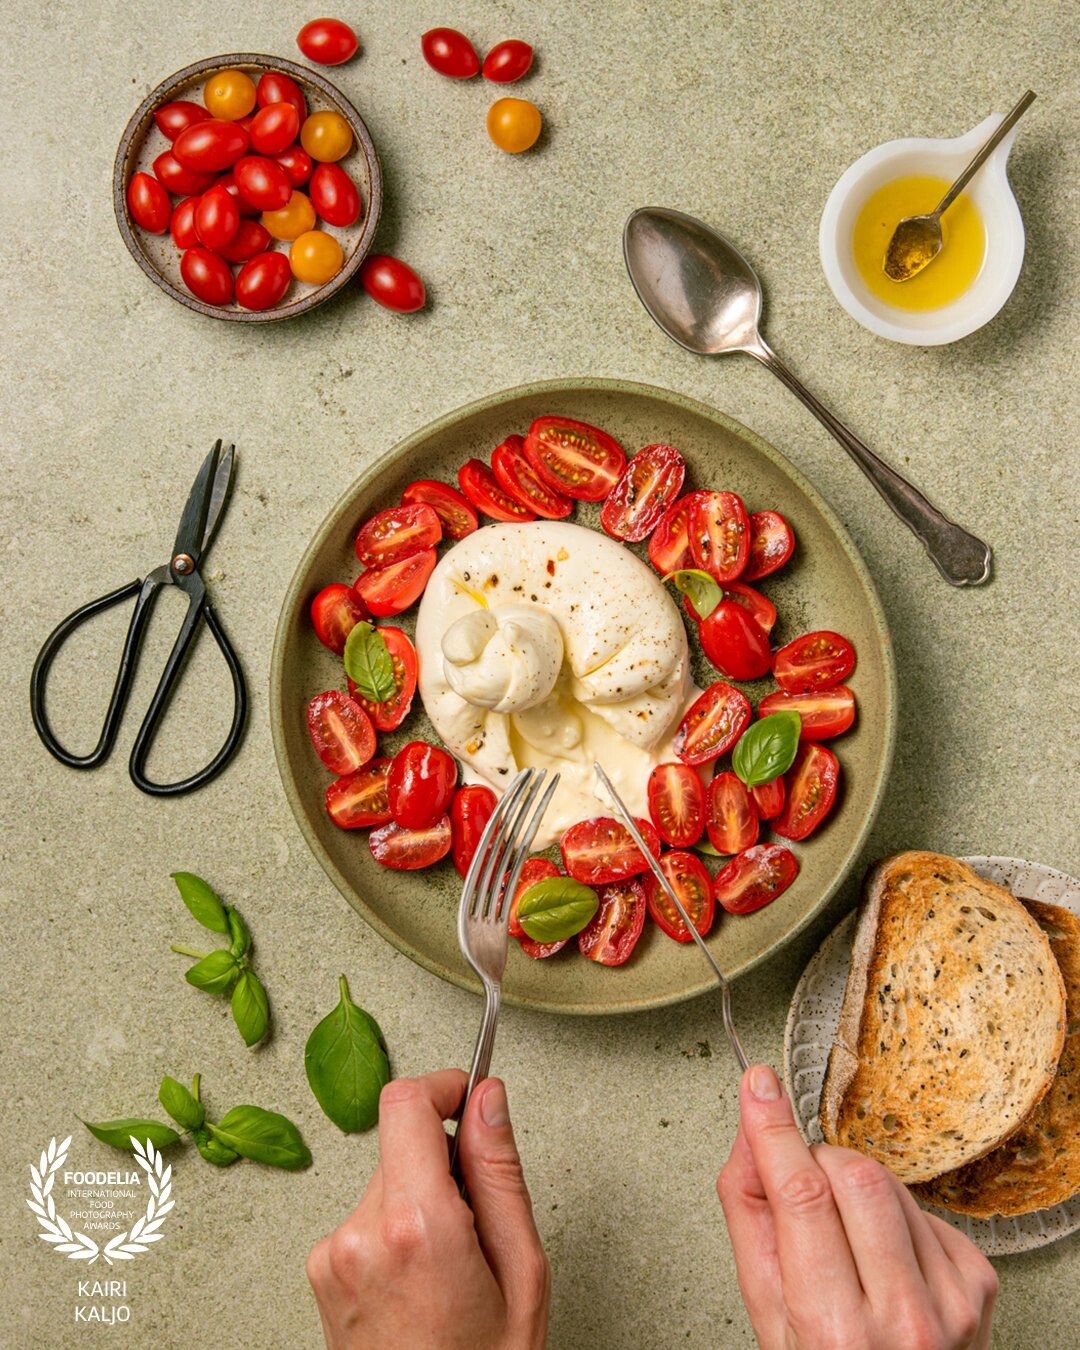 This photo was taken as part of the product styling session for a client featuring their Burrata cheese and showing off the surprise moment when you cut into it with fresh cream bursting out of it.